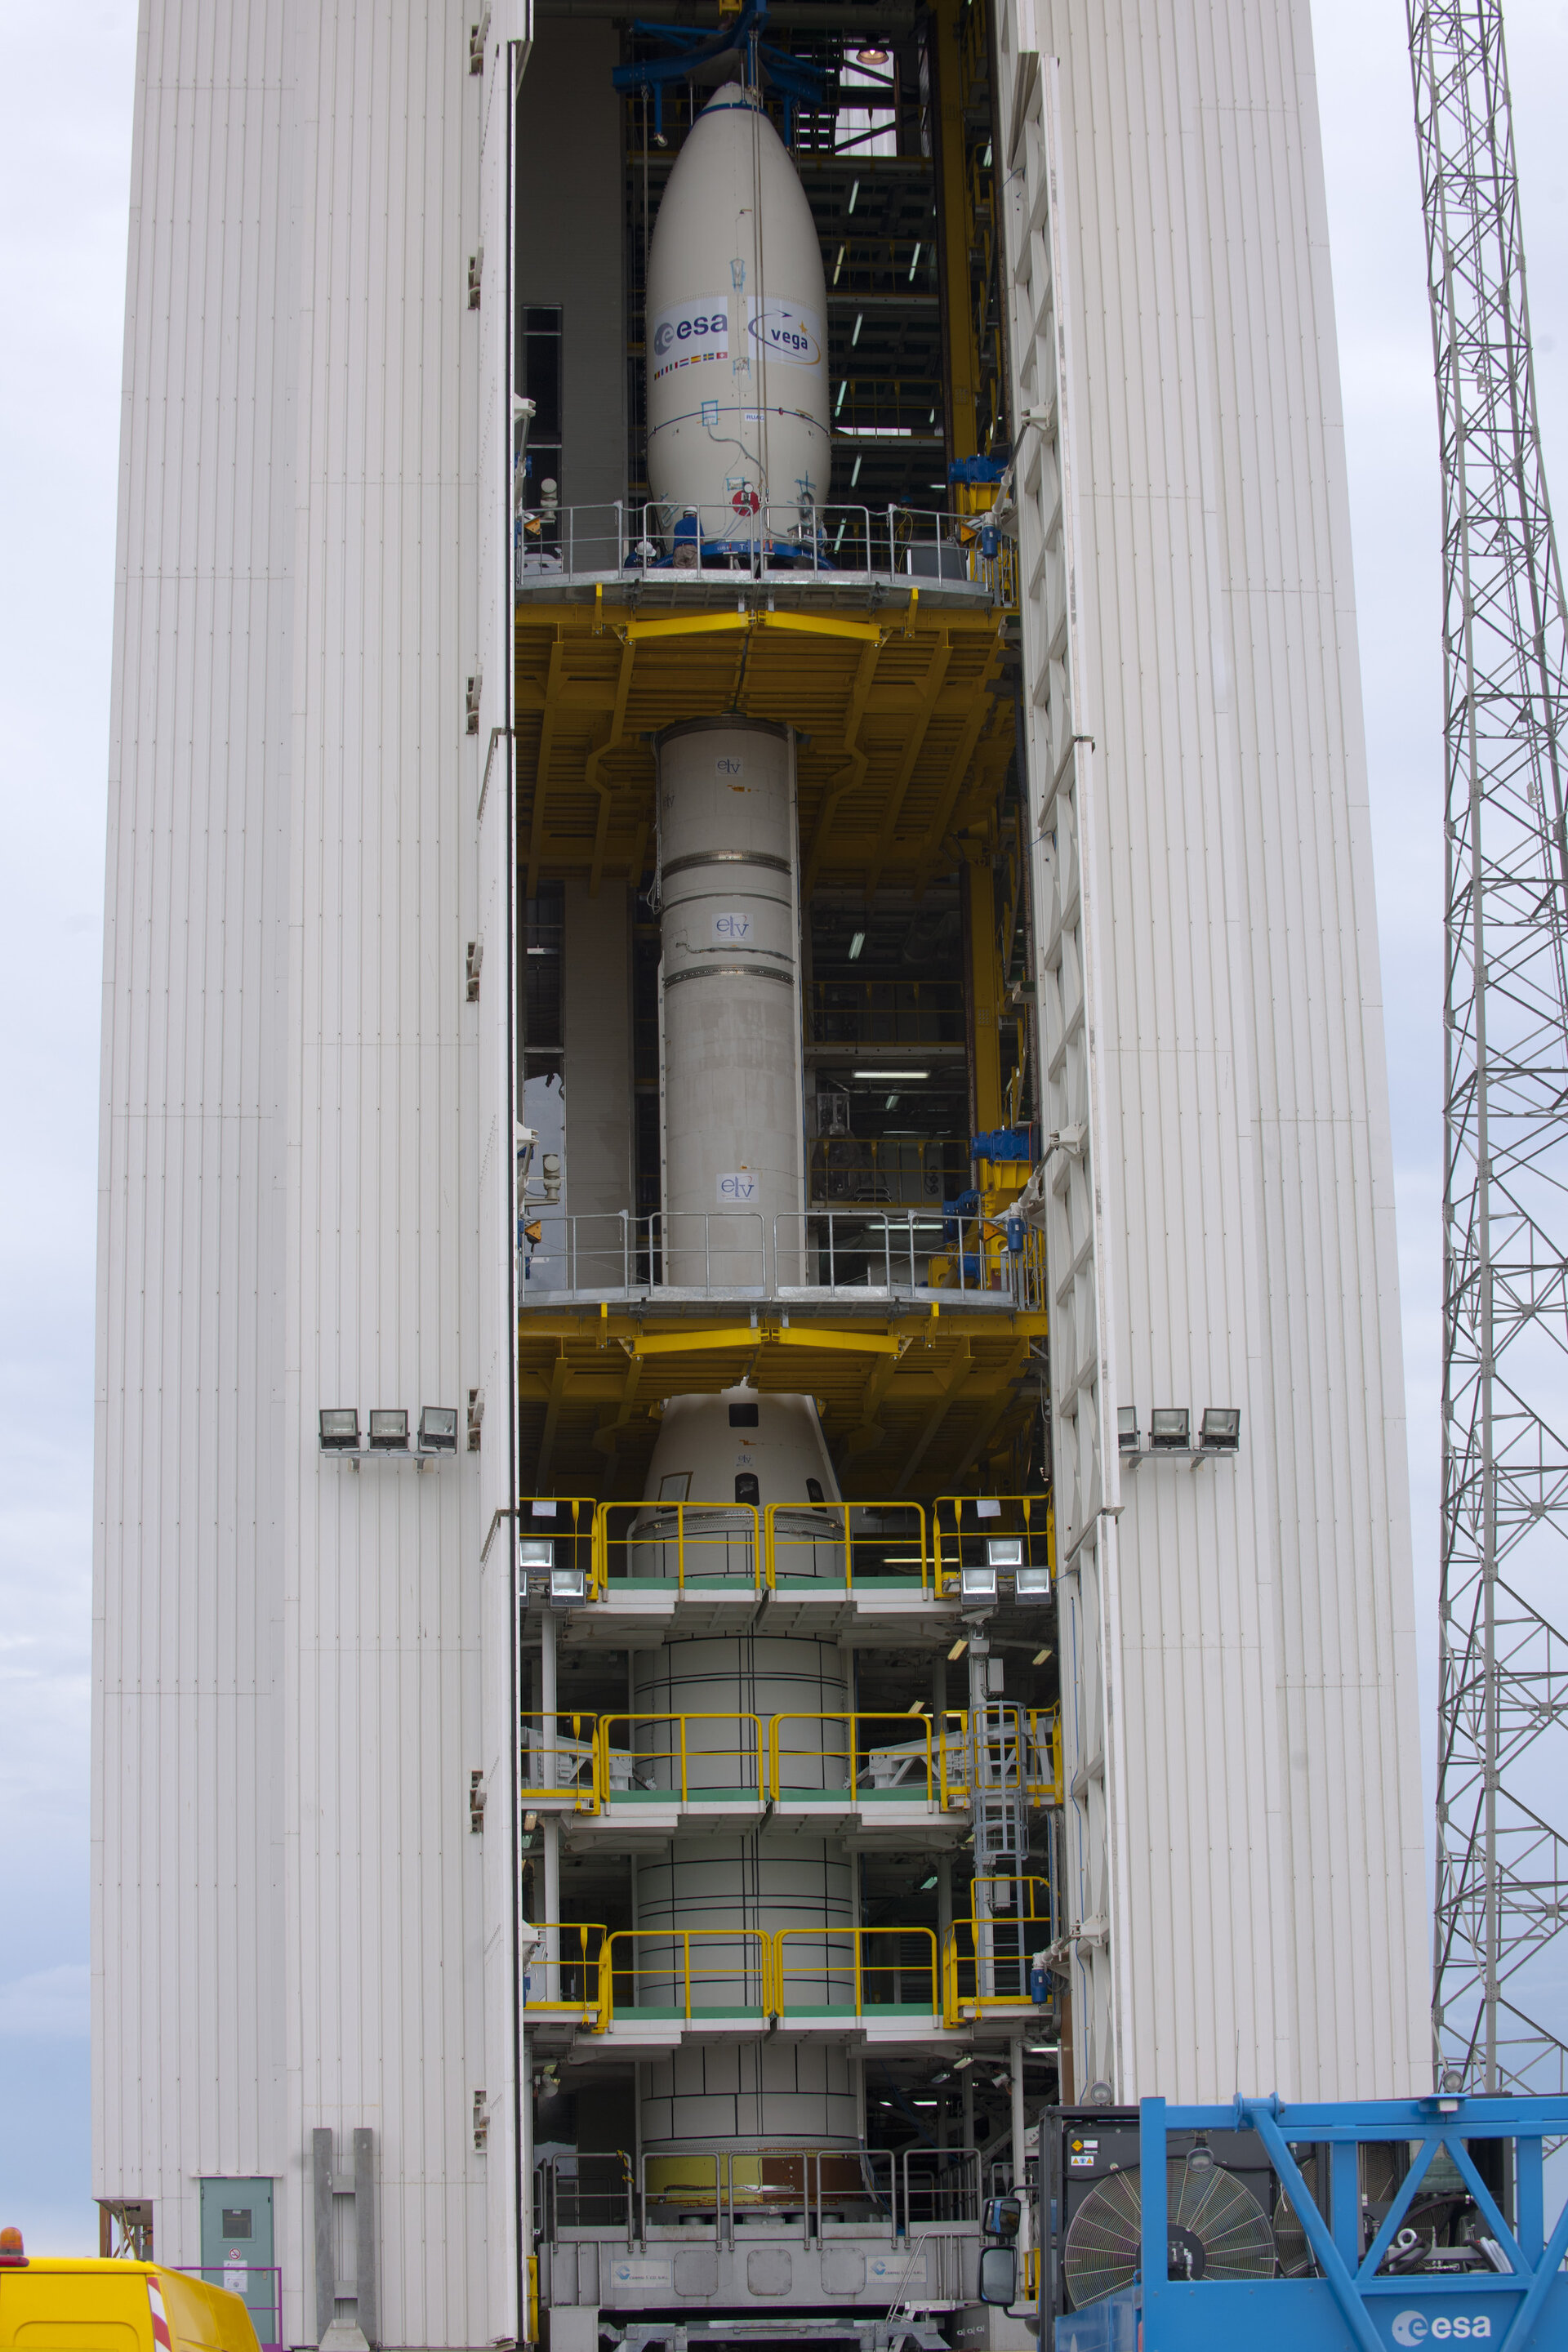 Vega launcher assembly with payload composite